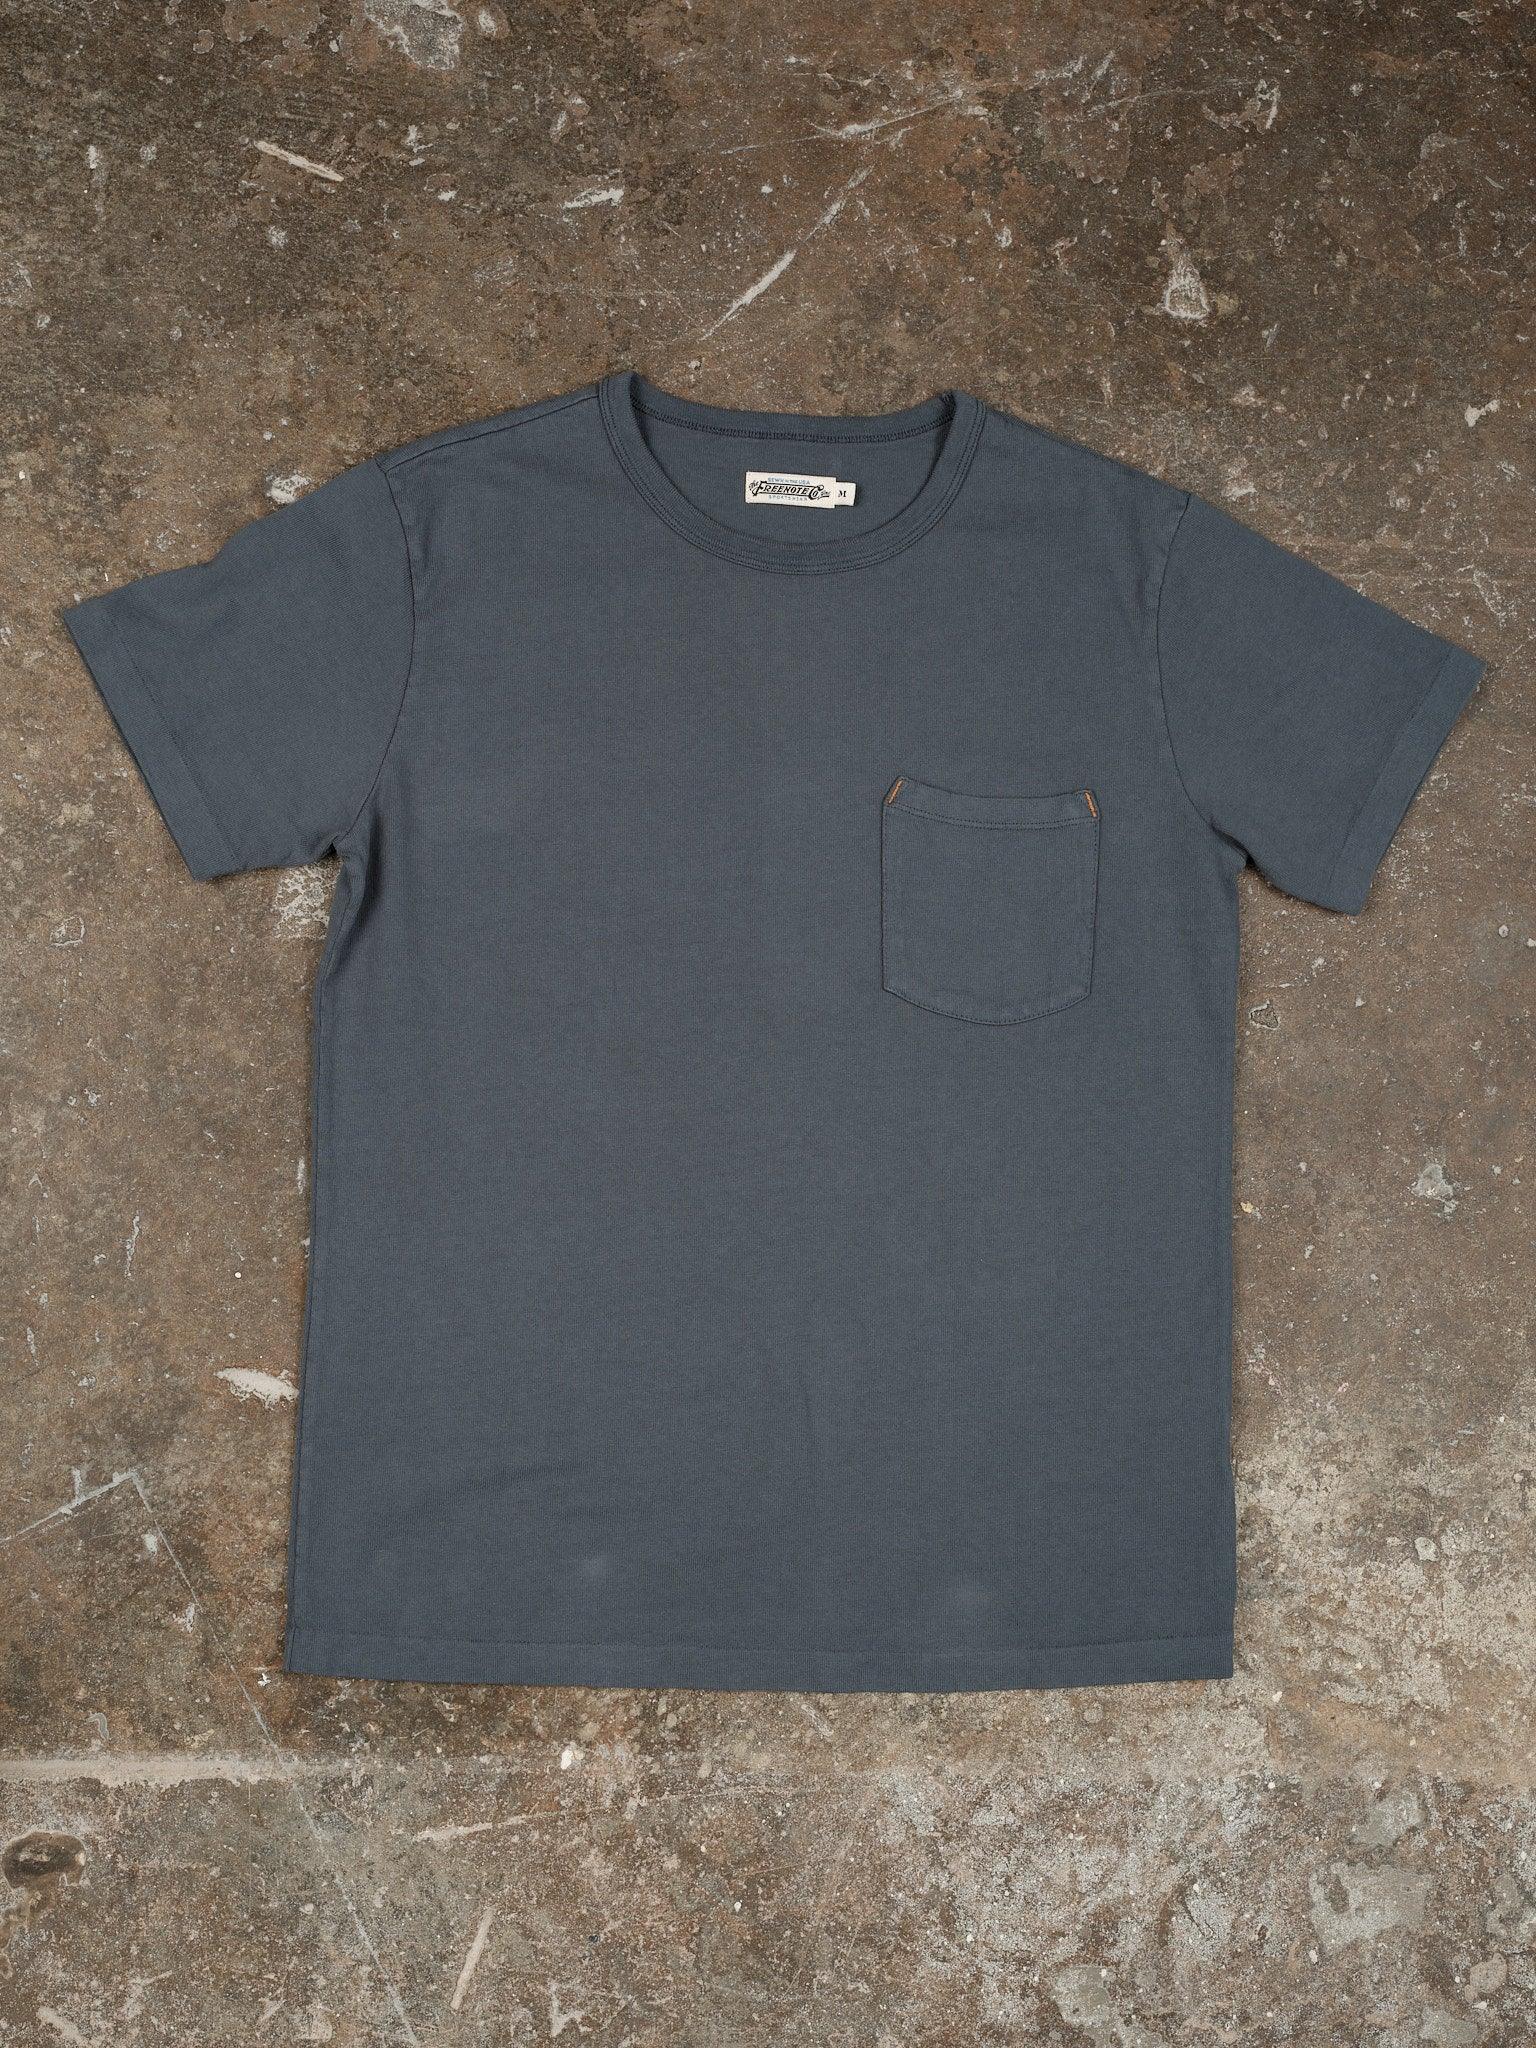 Heavyweight 13oz Pocket Tee - Faded Blue - Guilty Party